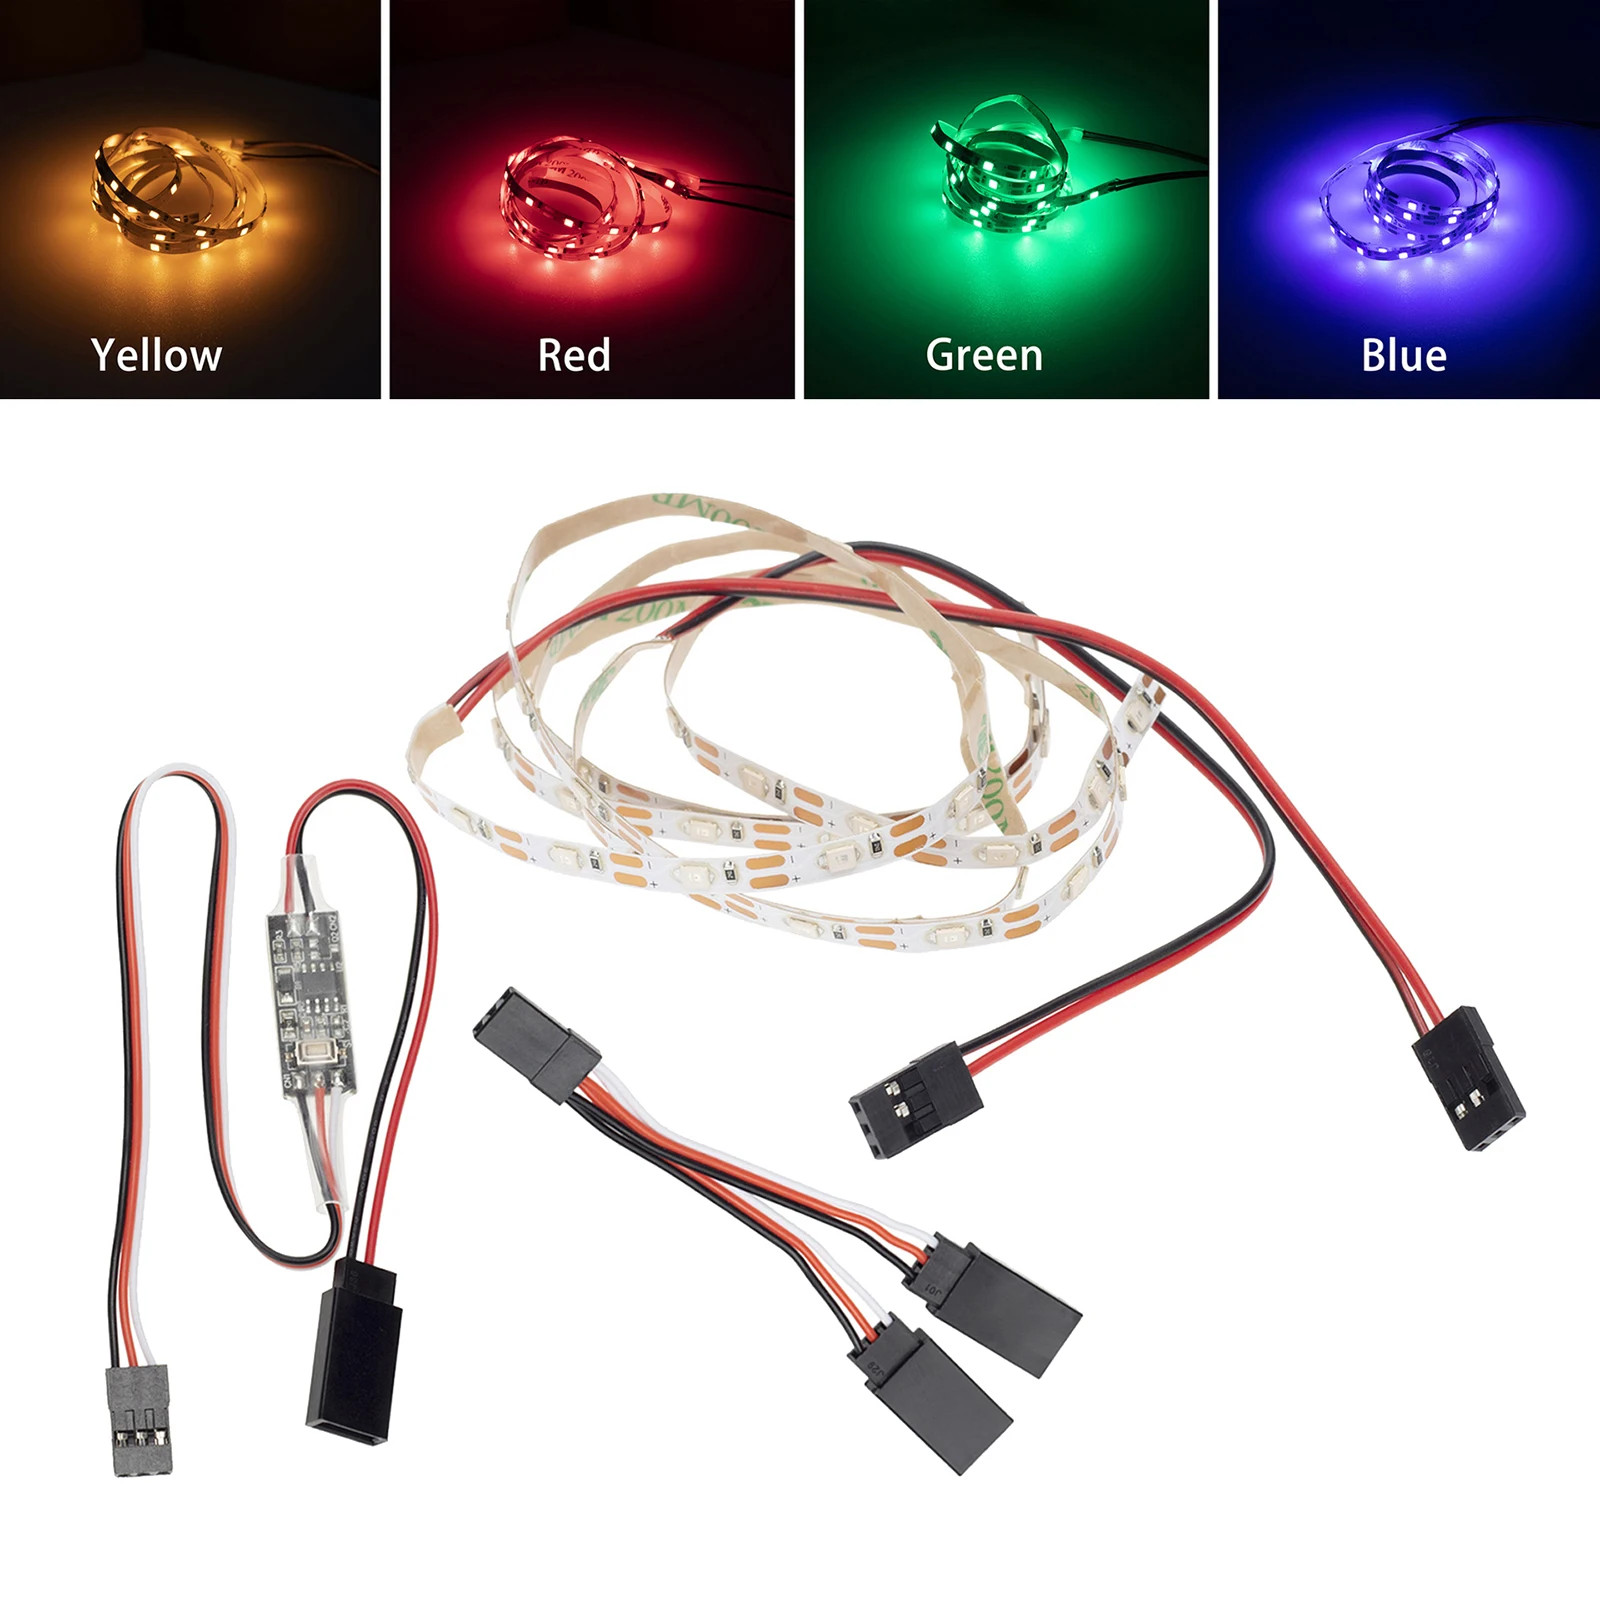 0.5m LED Light Strip With Controller Y-cable Super Brightness for RC Fixed Wing Airplane Flying Wing Plane